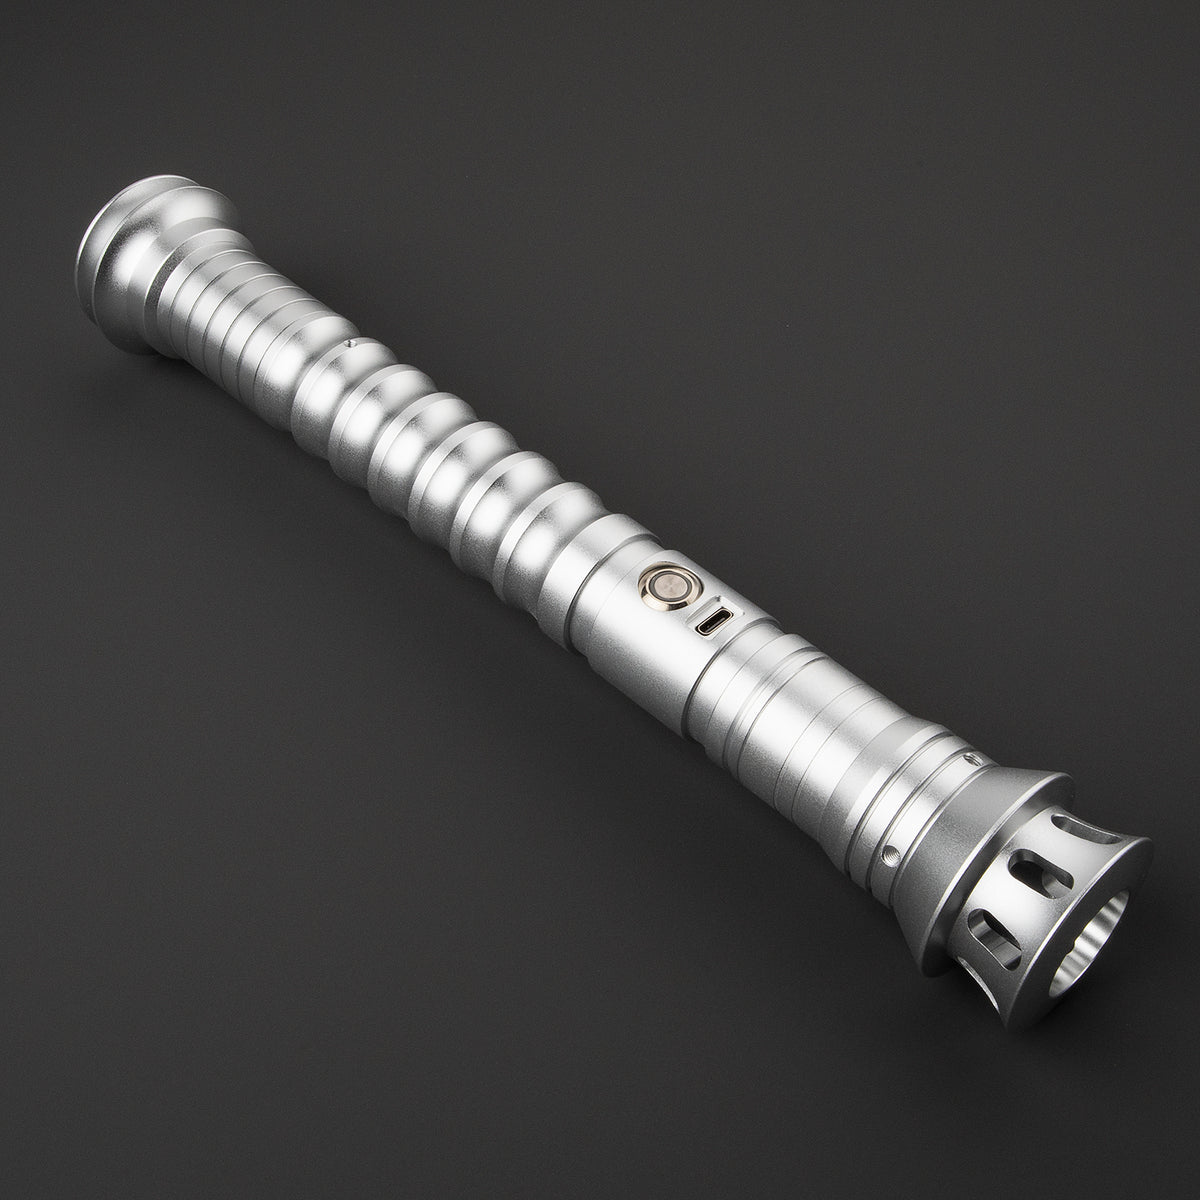 SaberCustom lightsaber complete VHC empty hilt without electronic kit or blade